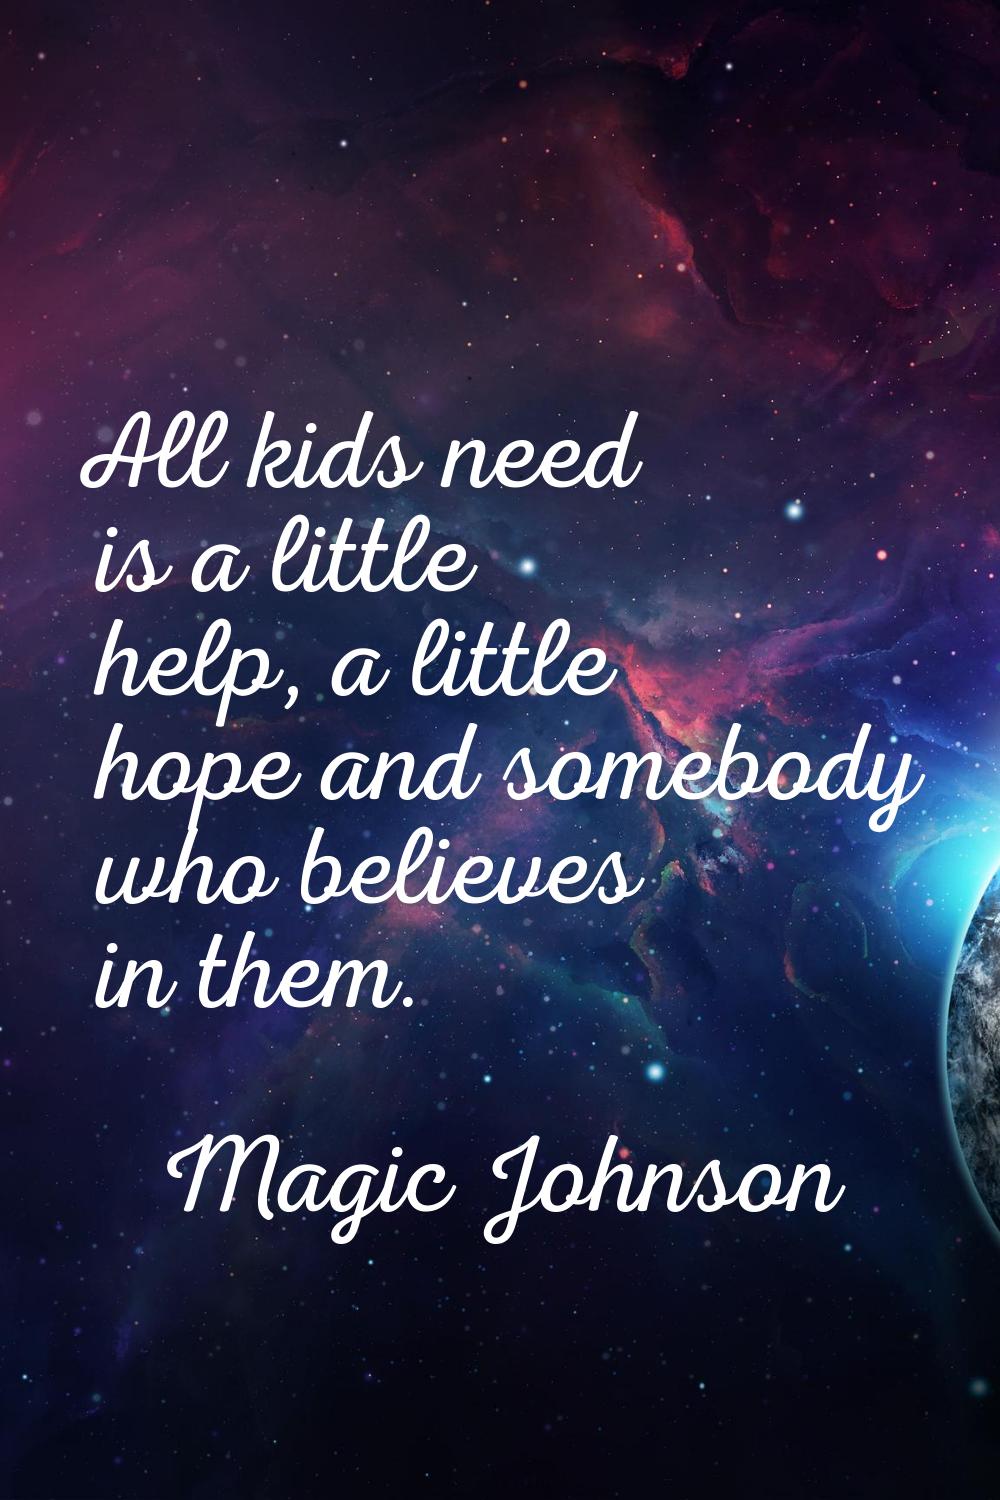 All kids need is a little help, a little hope and somebody who believes in them.